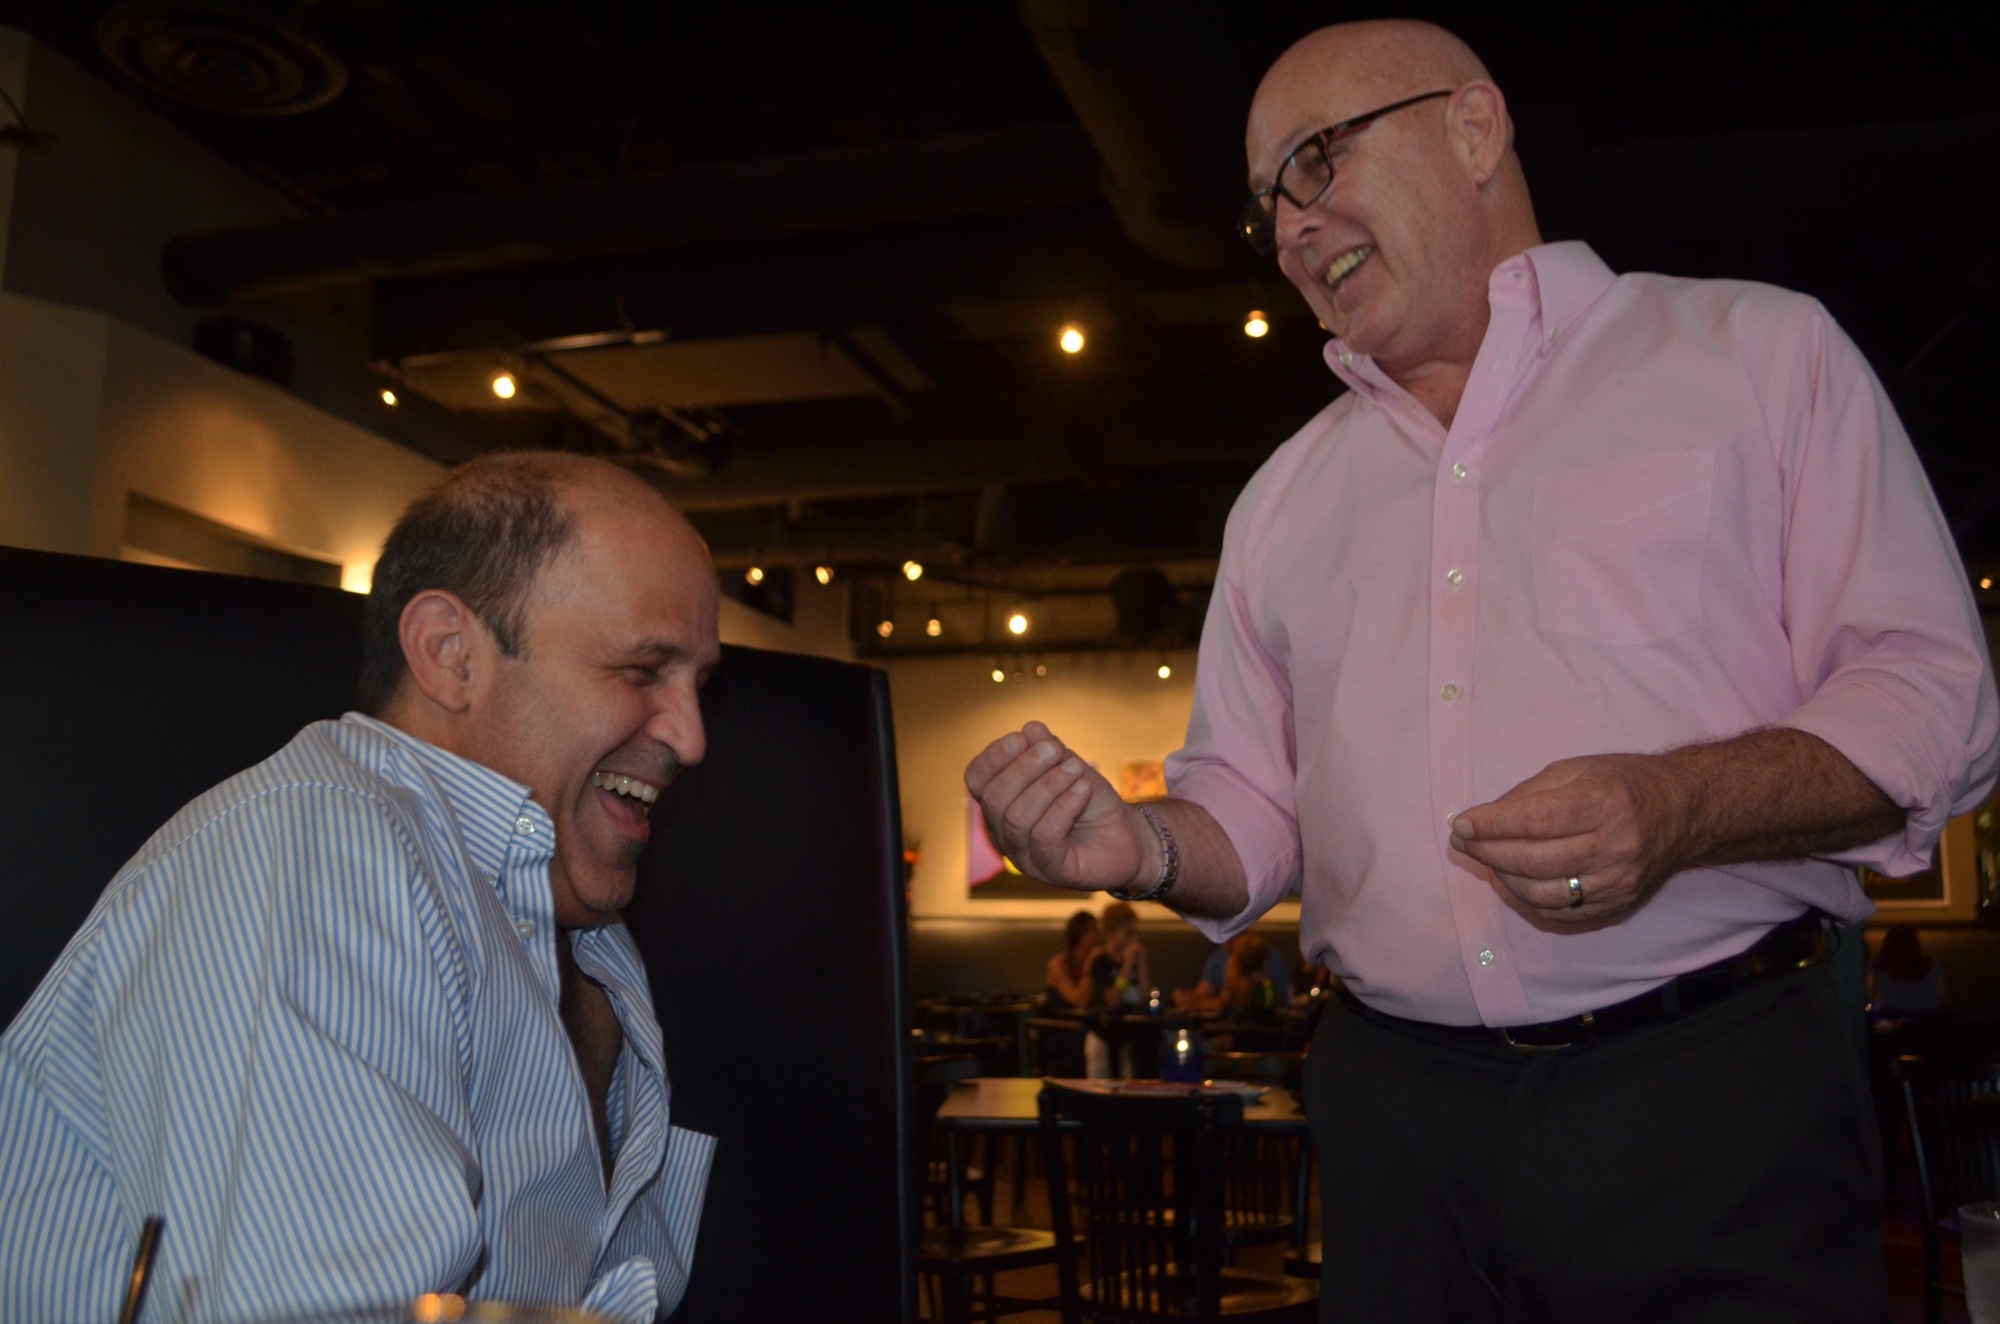 Resident Artist Ron Genta, 56, and Gary Fennessy, owner of Main Street Trattoria, have developed quite the friendship.